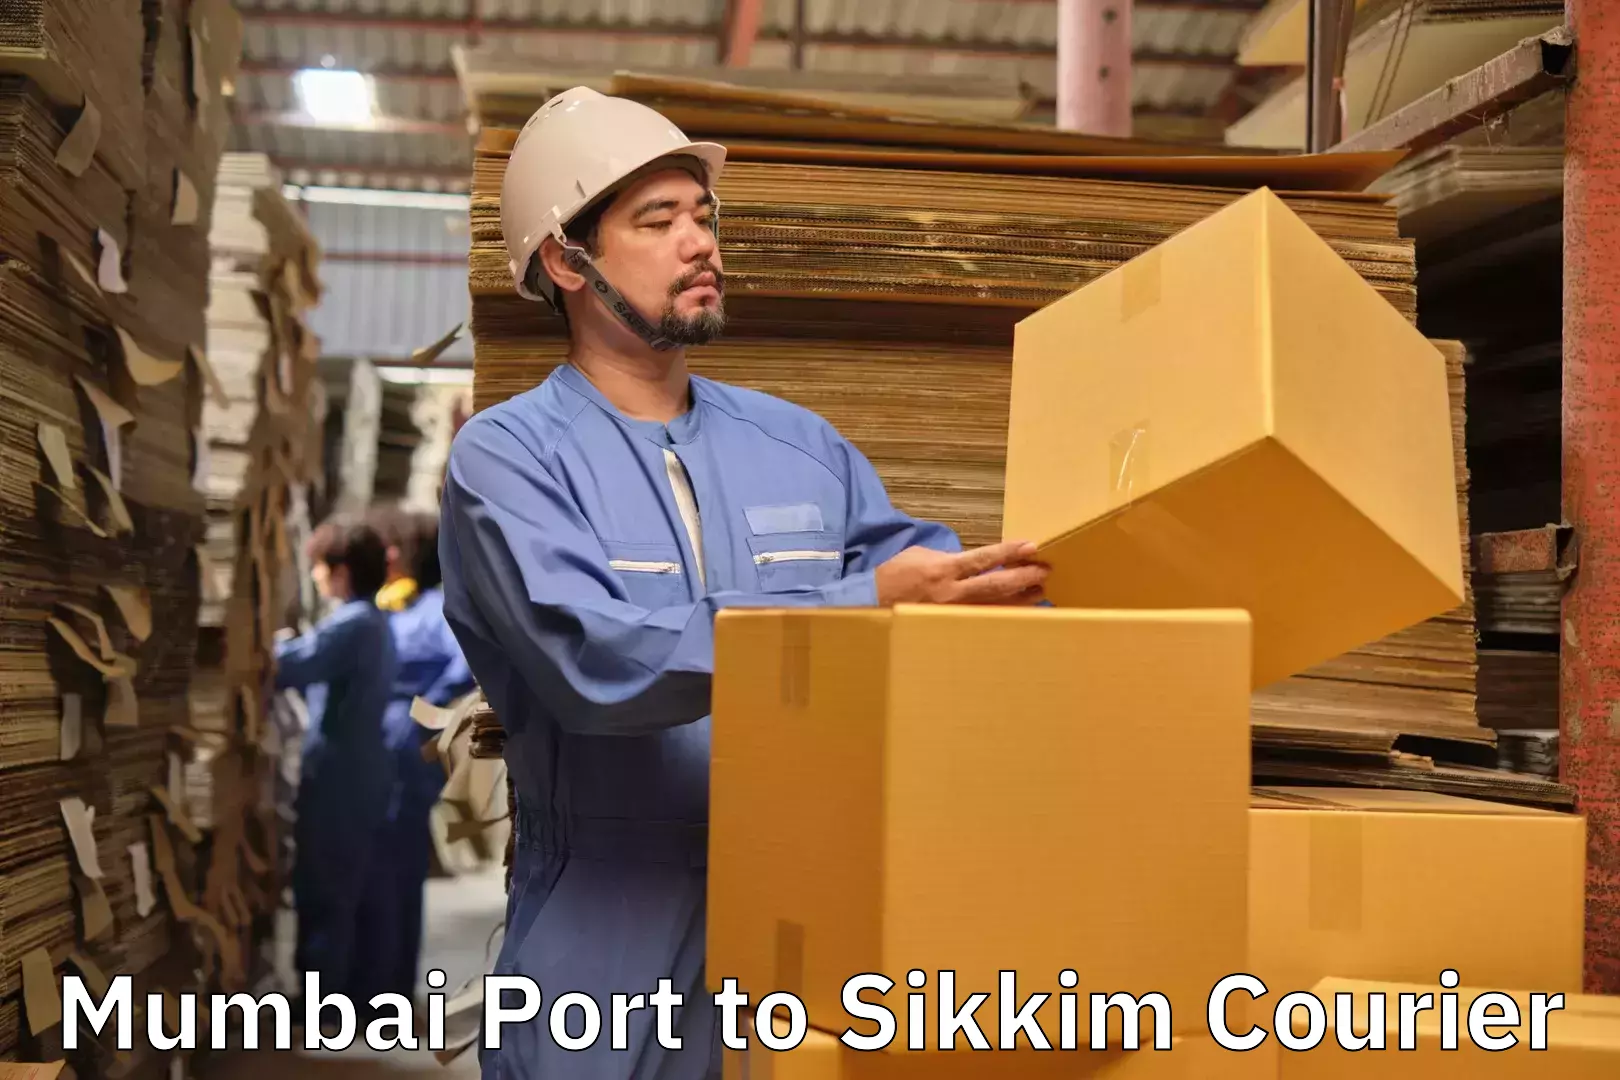 Baggage relocation service Mumbai Port to East Sikkim